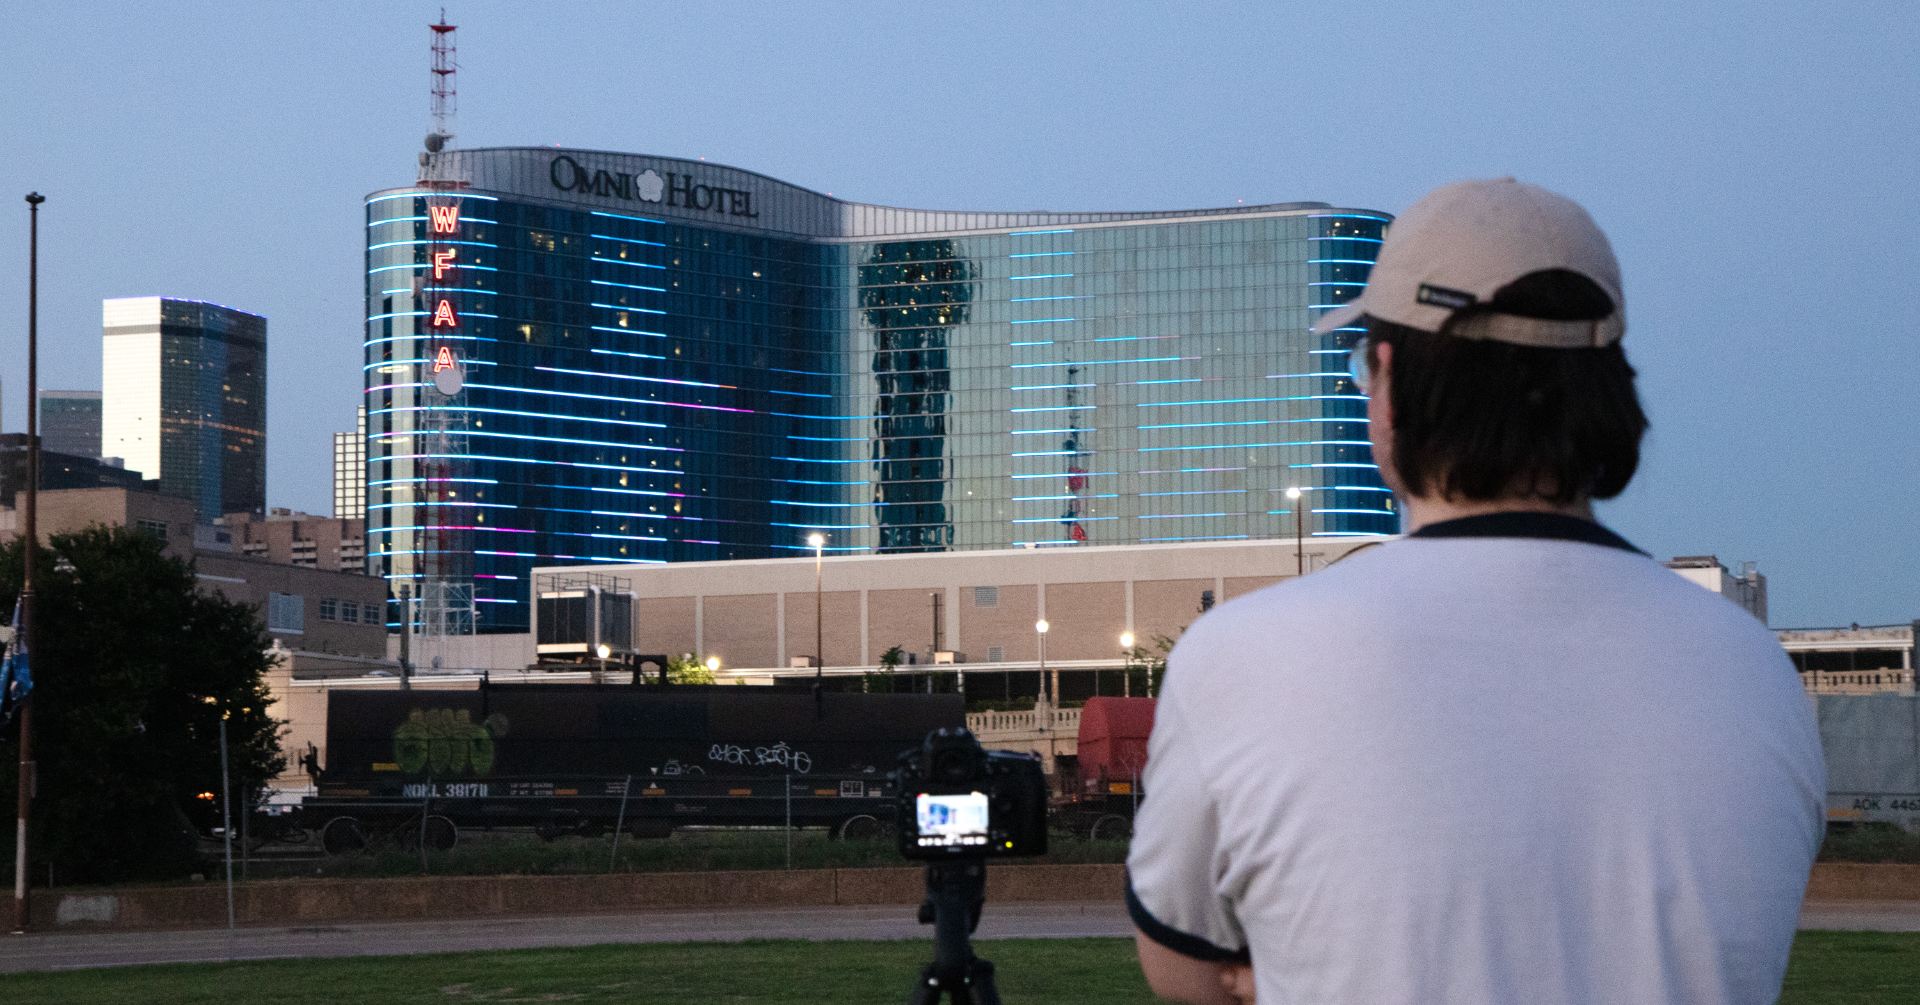 Projection Mapping students joined Professor Andrew F. Scott at Reunion Arena Park on Monday for a viewing of the Omni Dallas Hotel.